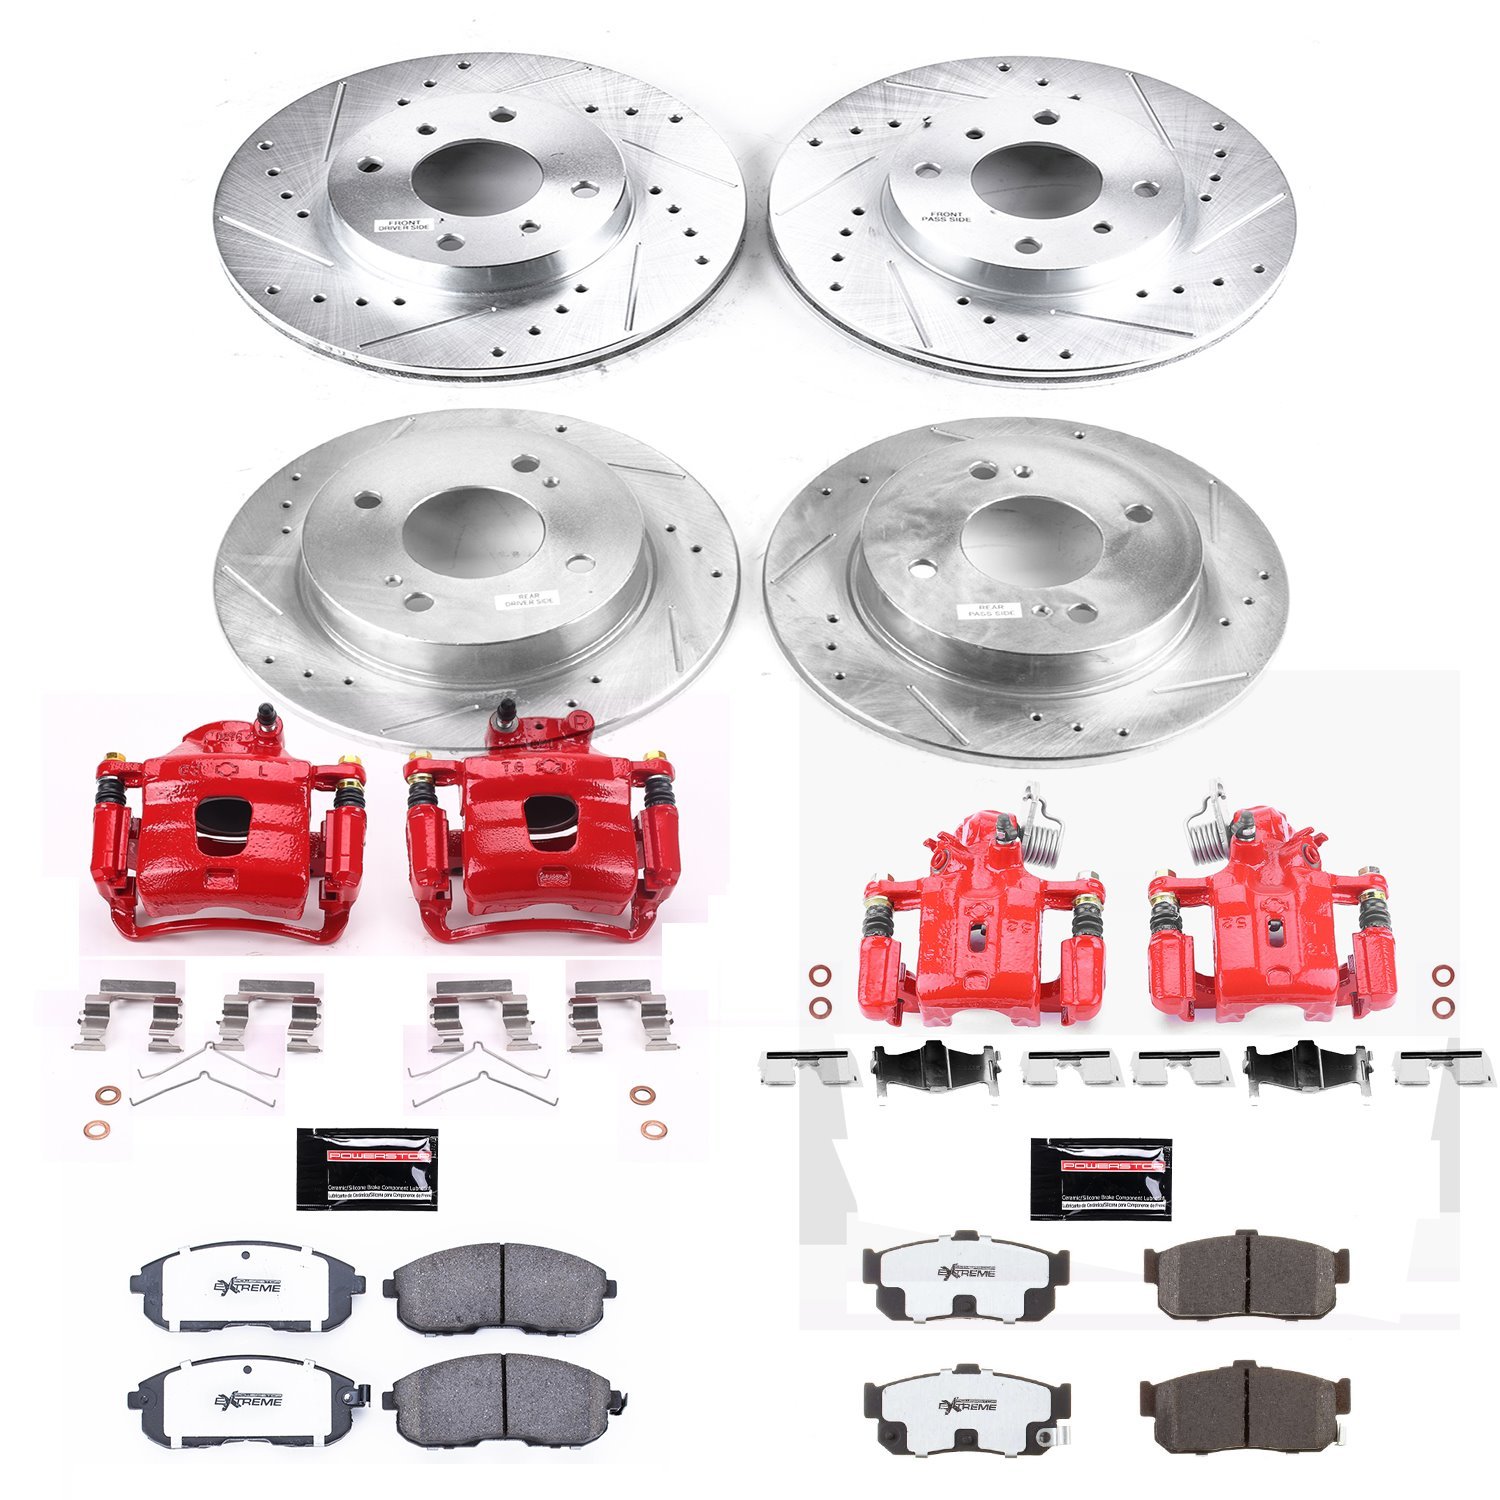 Z26 Extreme Street Warrior Front and Rear Brake Kit w/Calipers for 2000-2001 Nissan Sentra